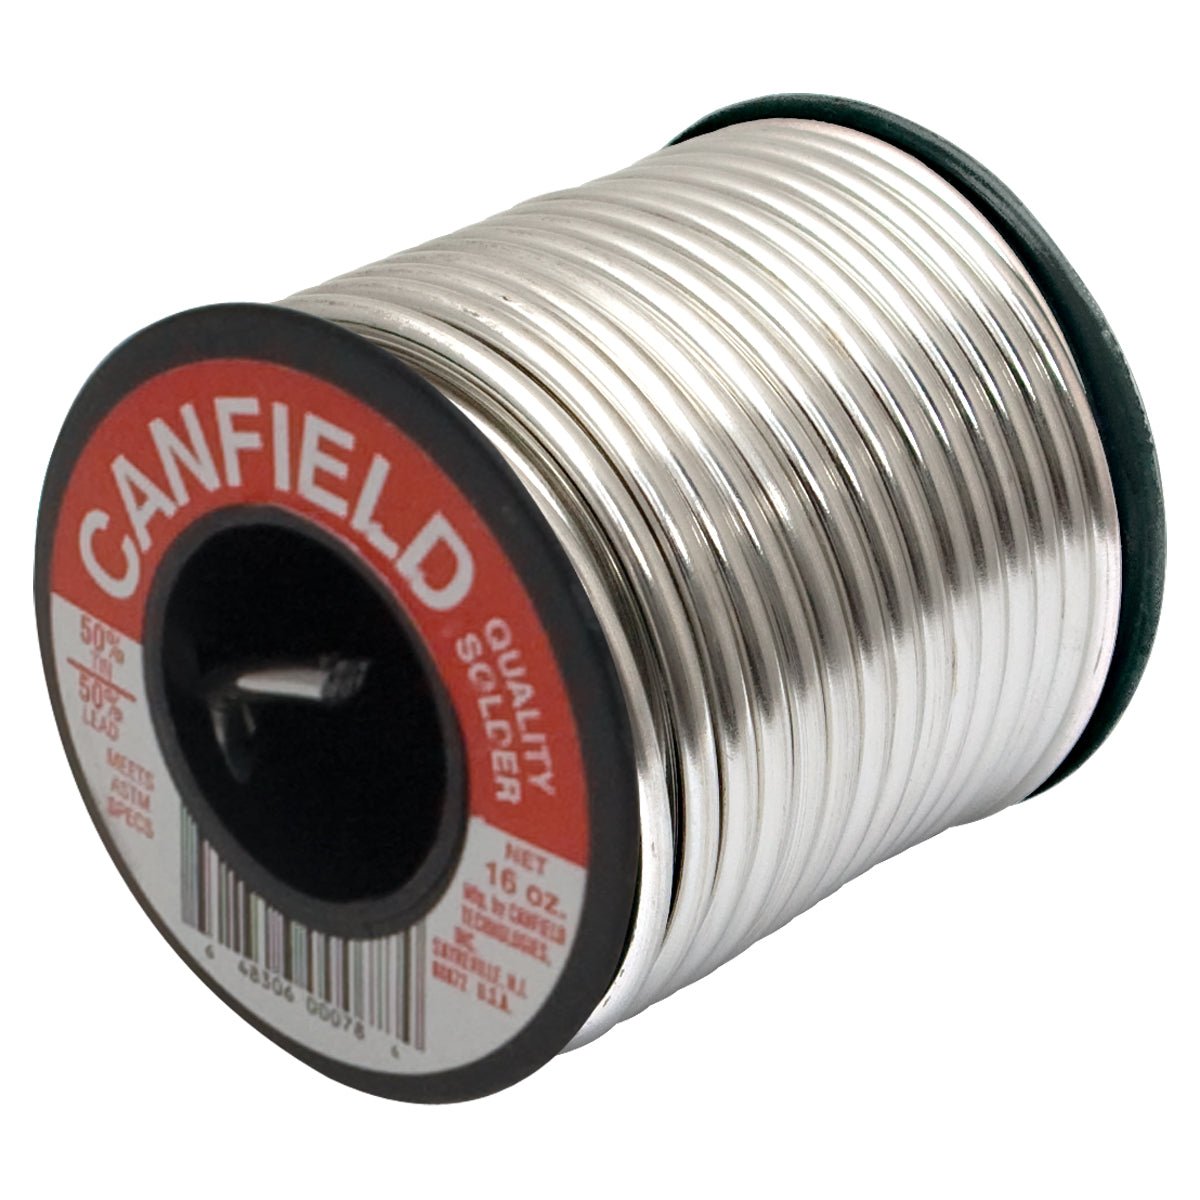 Canfield’s Solder – 1 Lb. Spool – 50/50 Wire